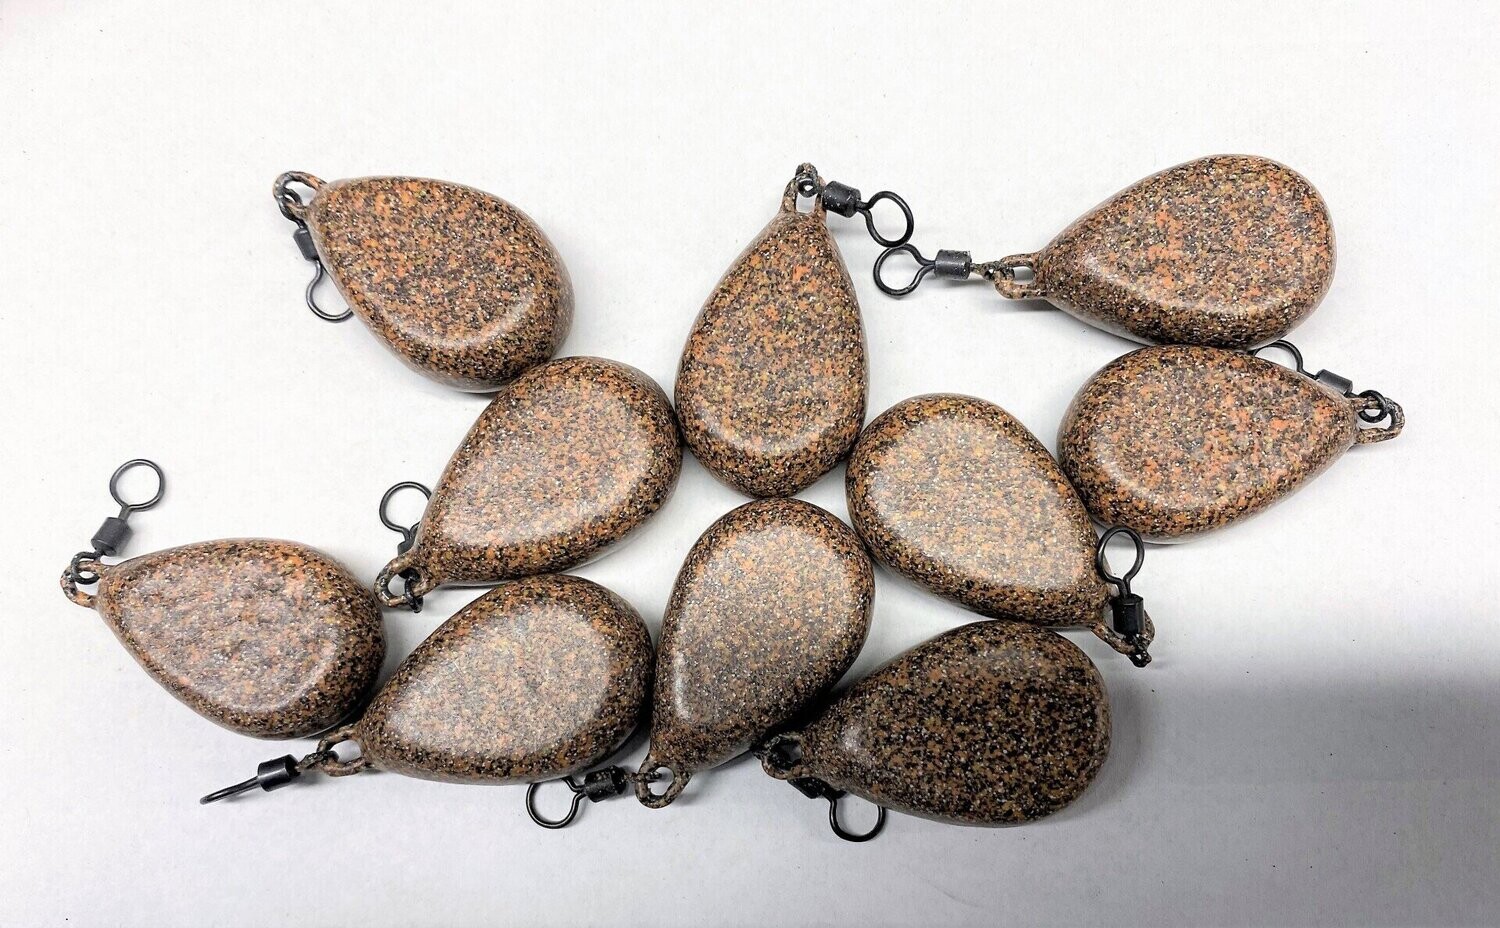 2 oz. DARK SAND flat pears CARP LEADS weights., sold in packs of 10.